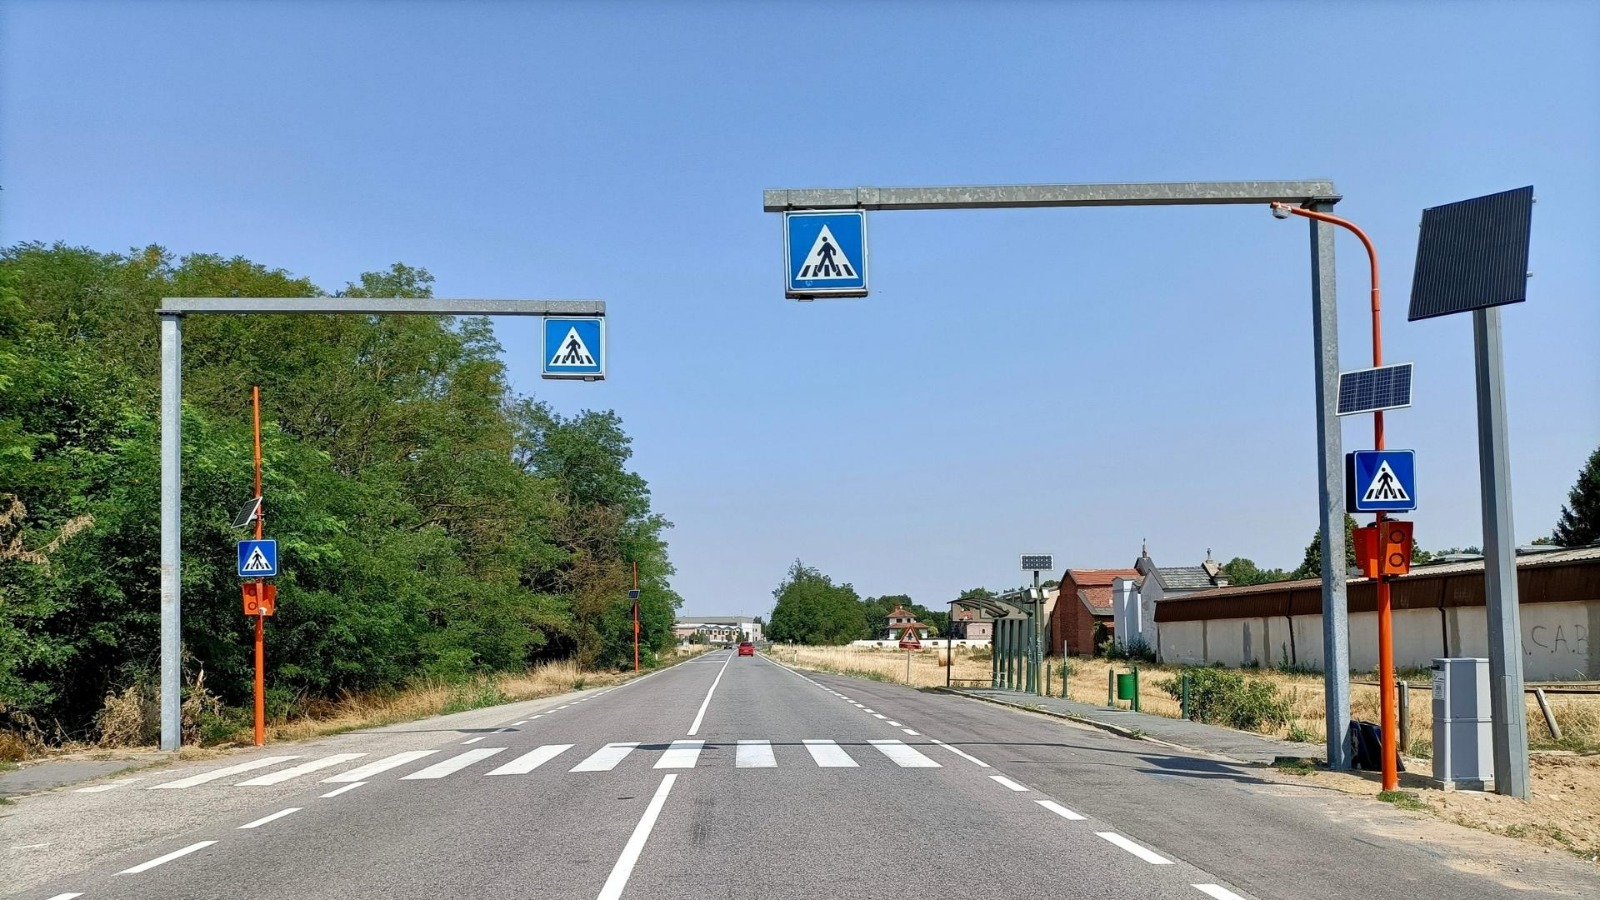 New pedestrian crossing control systems are active in the municipalities of Liscate and Vermezzo